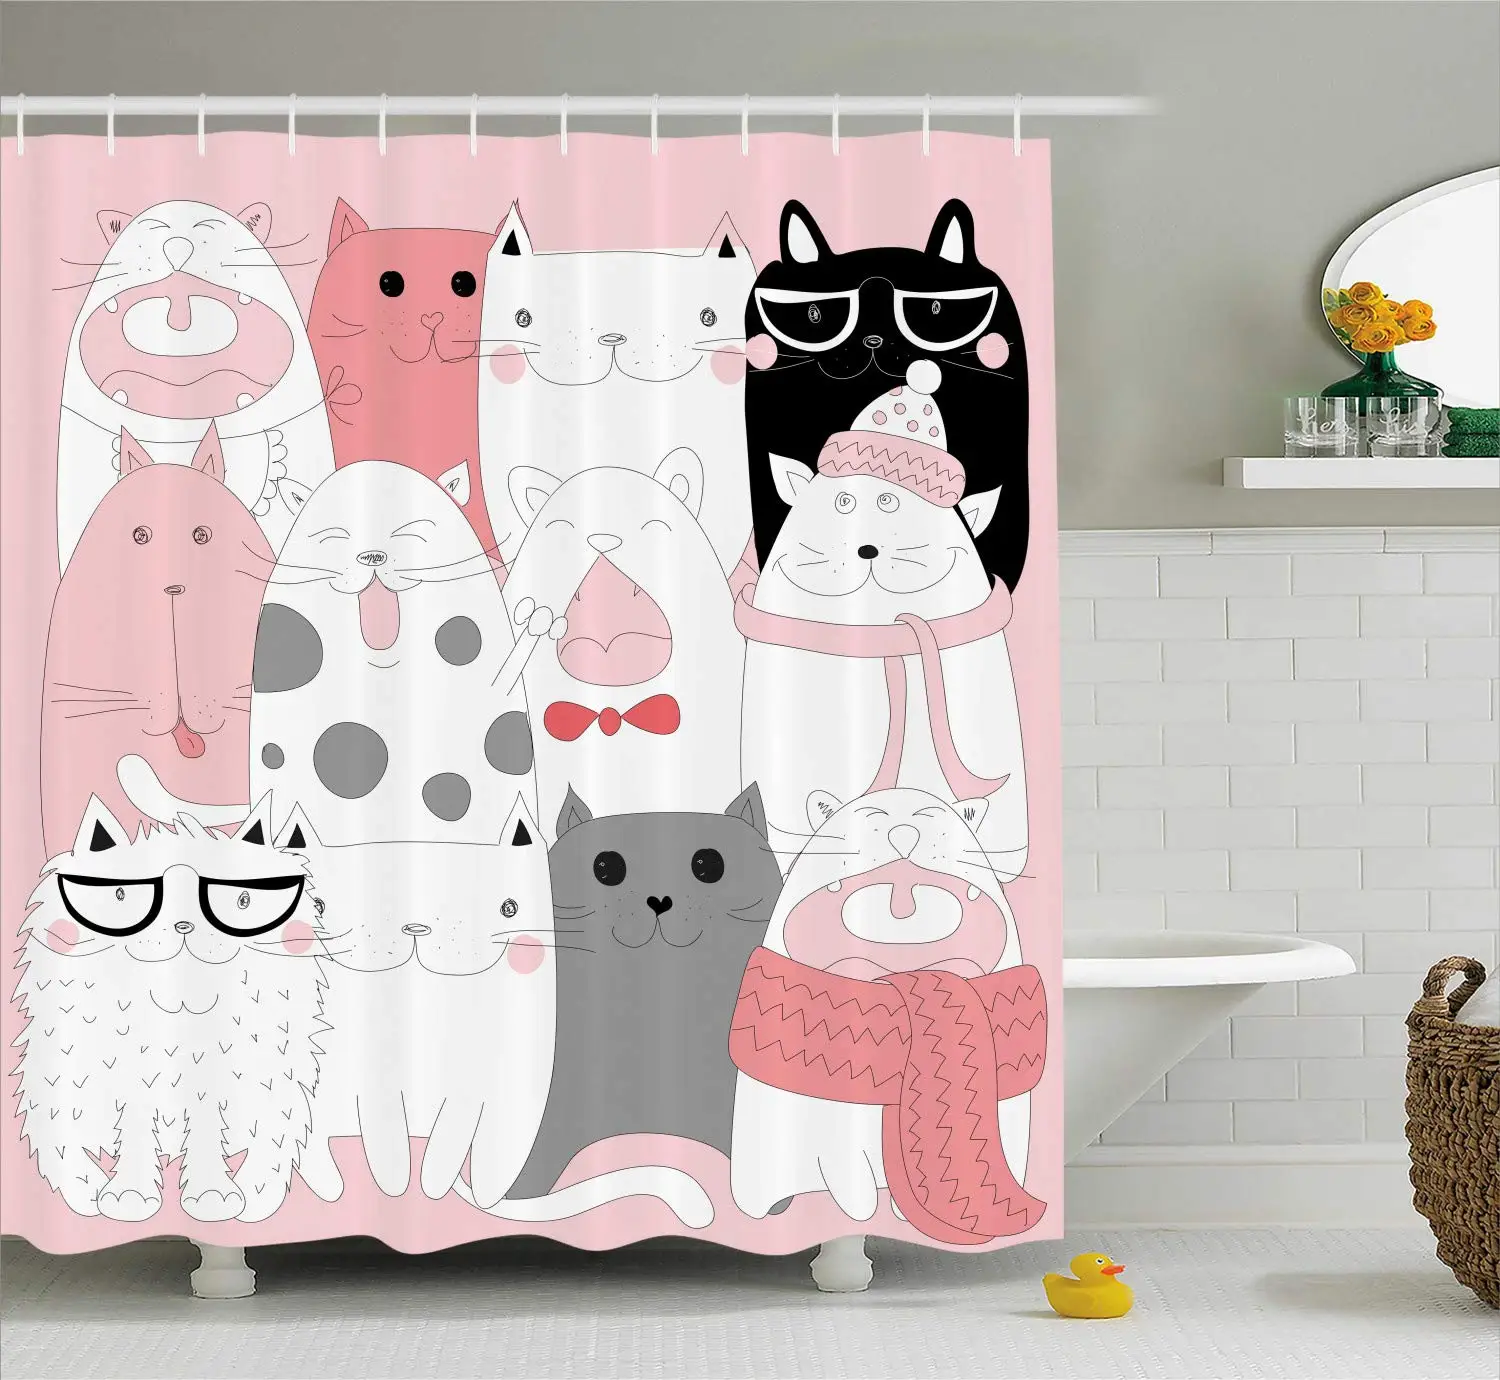 

Cute Cartoon Kittens Funny Smiling Glasses Scarfs Doodle Humorous Design Cloth Fabric Bathroom Decor Pink White